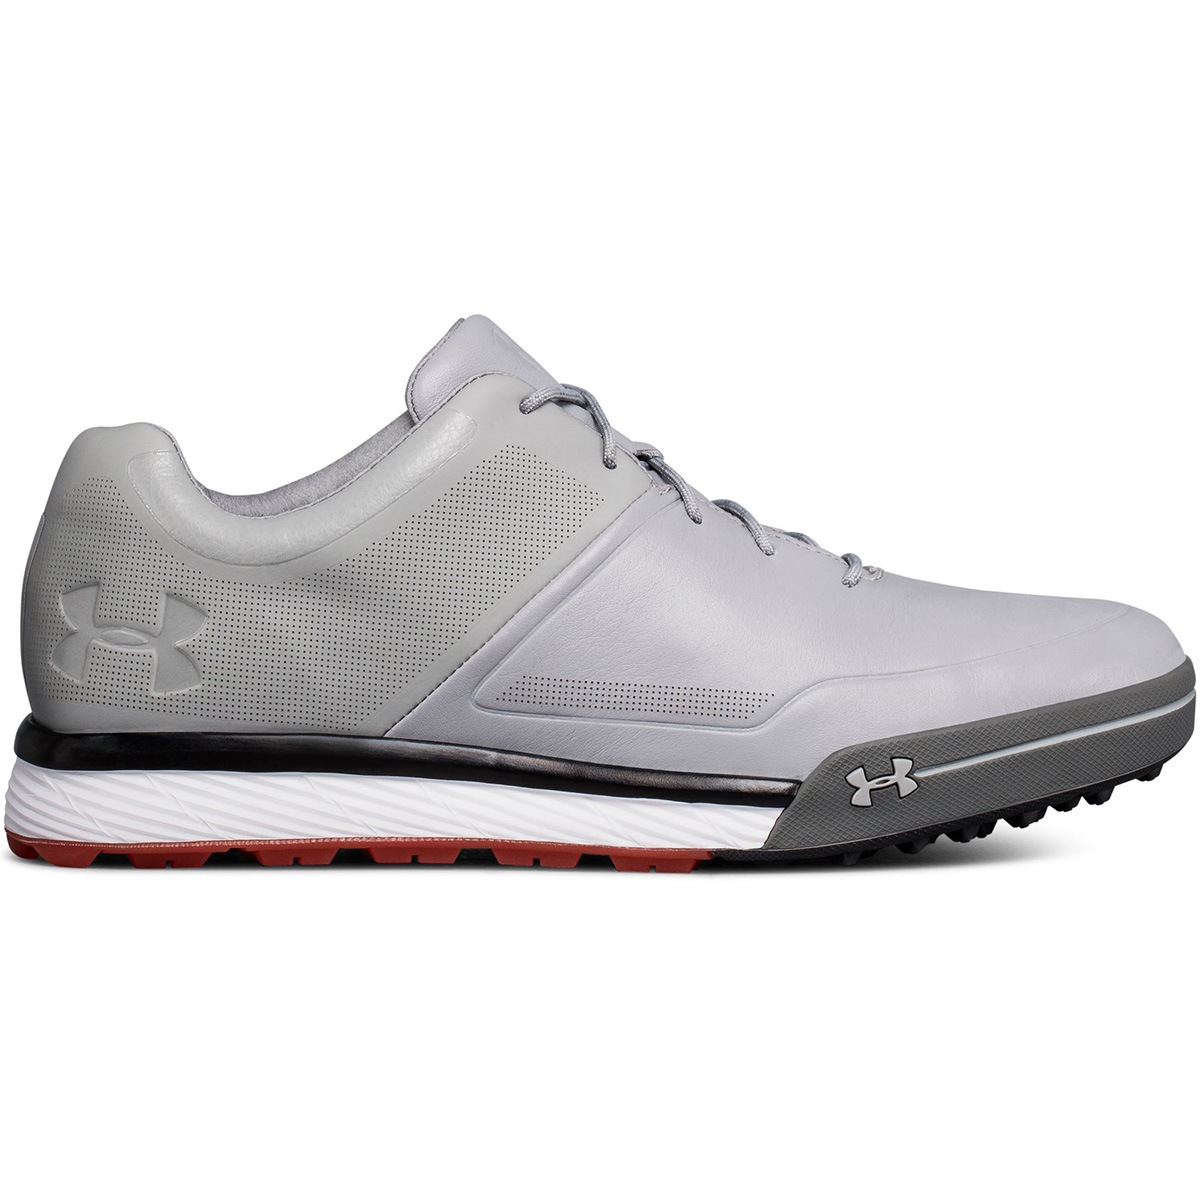 Under Armour Tempo Hybrid 2 Shoes Online